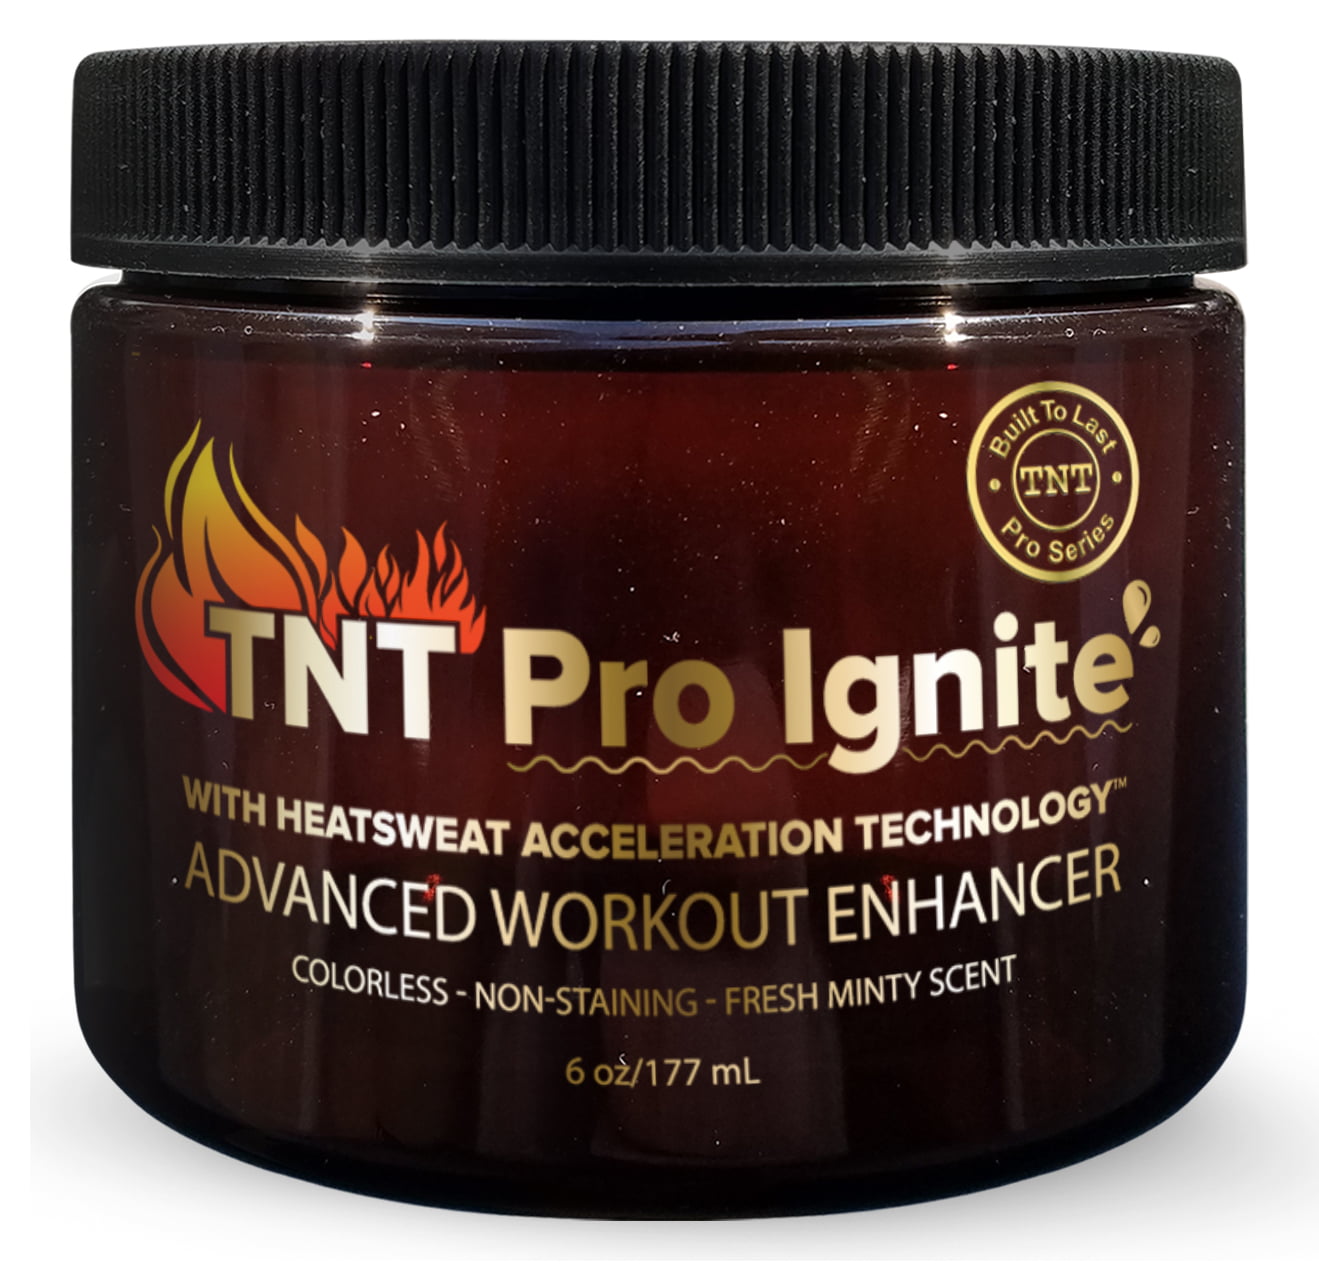 6.5 oz Jar TNT Pro Series Fat Burning Cream for Belly â‚¬â€œ TNT Pro Ignite Sweat Cream for Women and Men â‚¬â€œ Thermogenic Weight Loss Workout Slimming Workout Enhancer